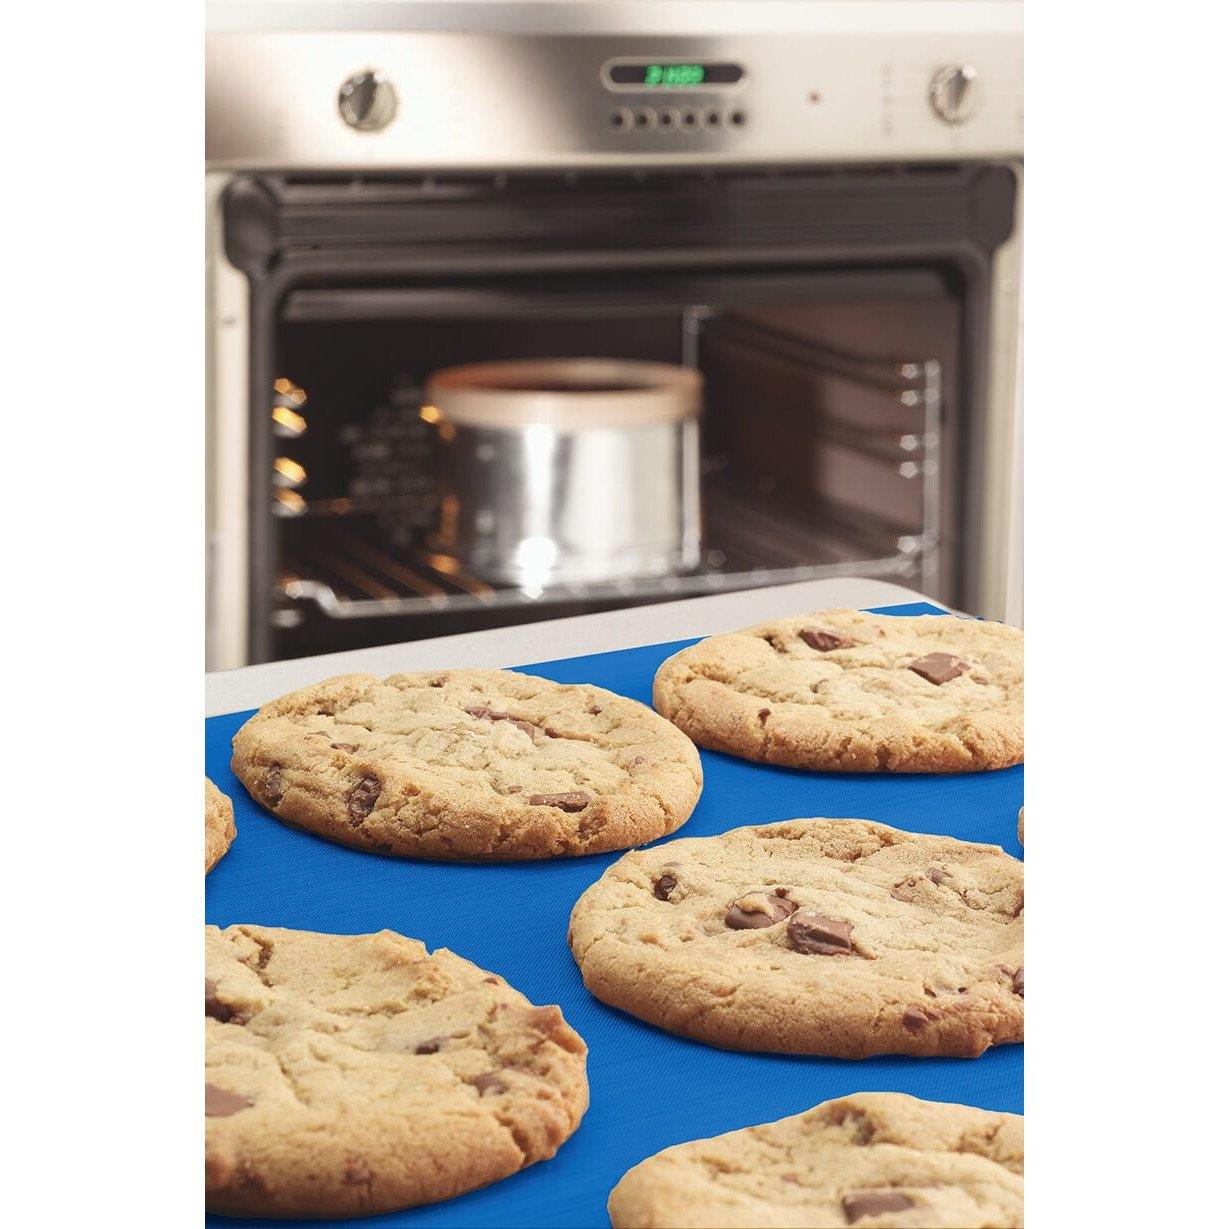 Bake-O-Glide™ RGB Primary Non-Stick, Reusable Cooking & Baking Liners - 3 pack - Bake-O-Glide